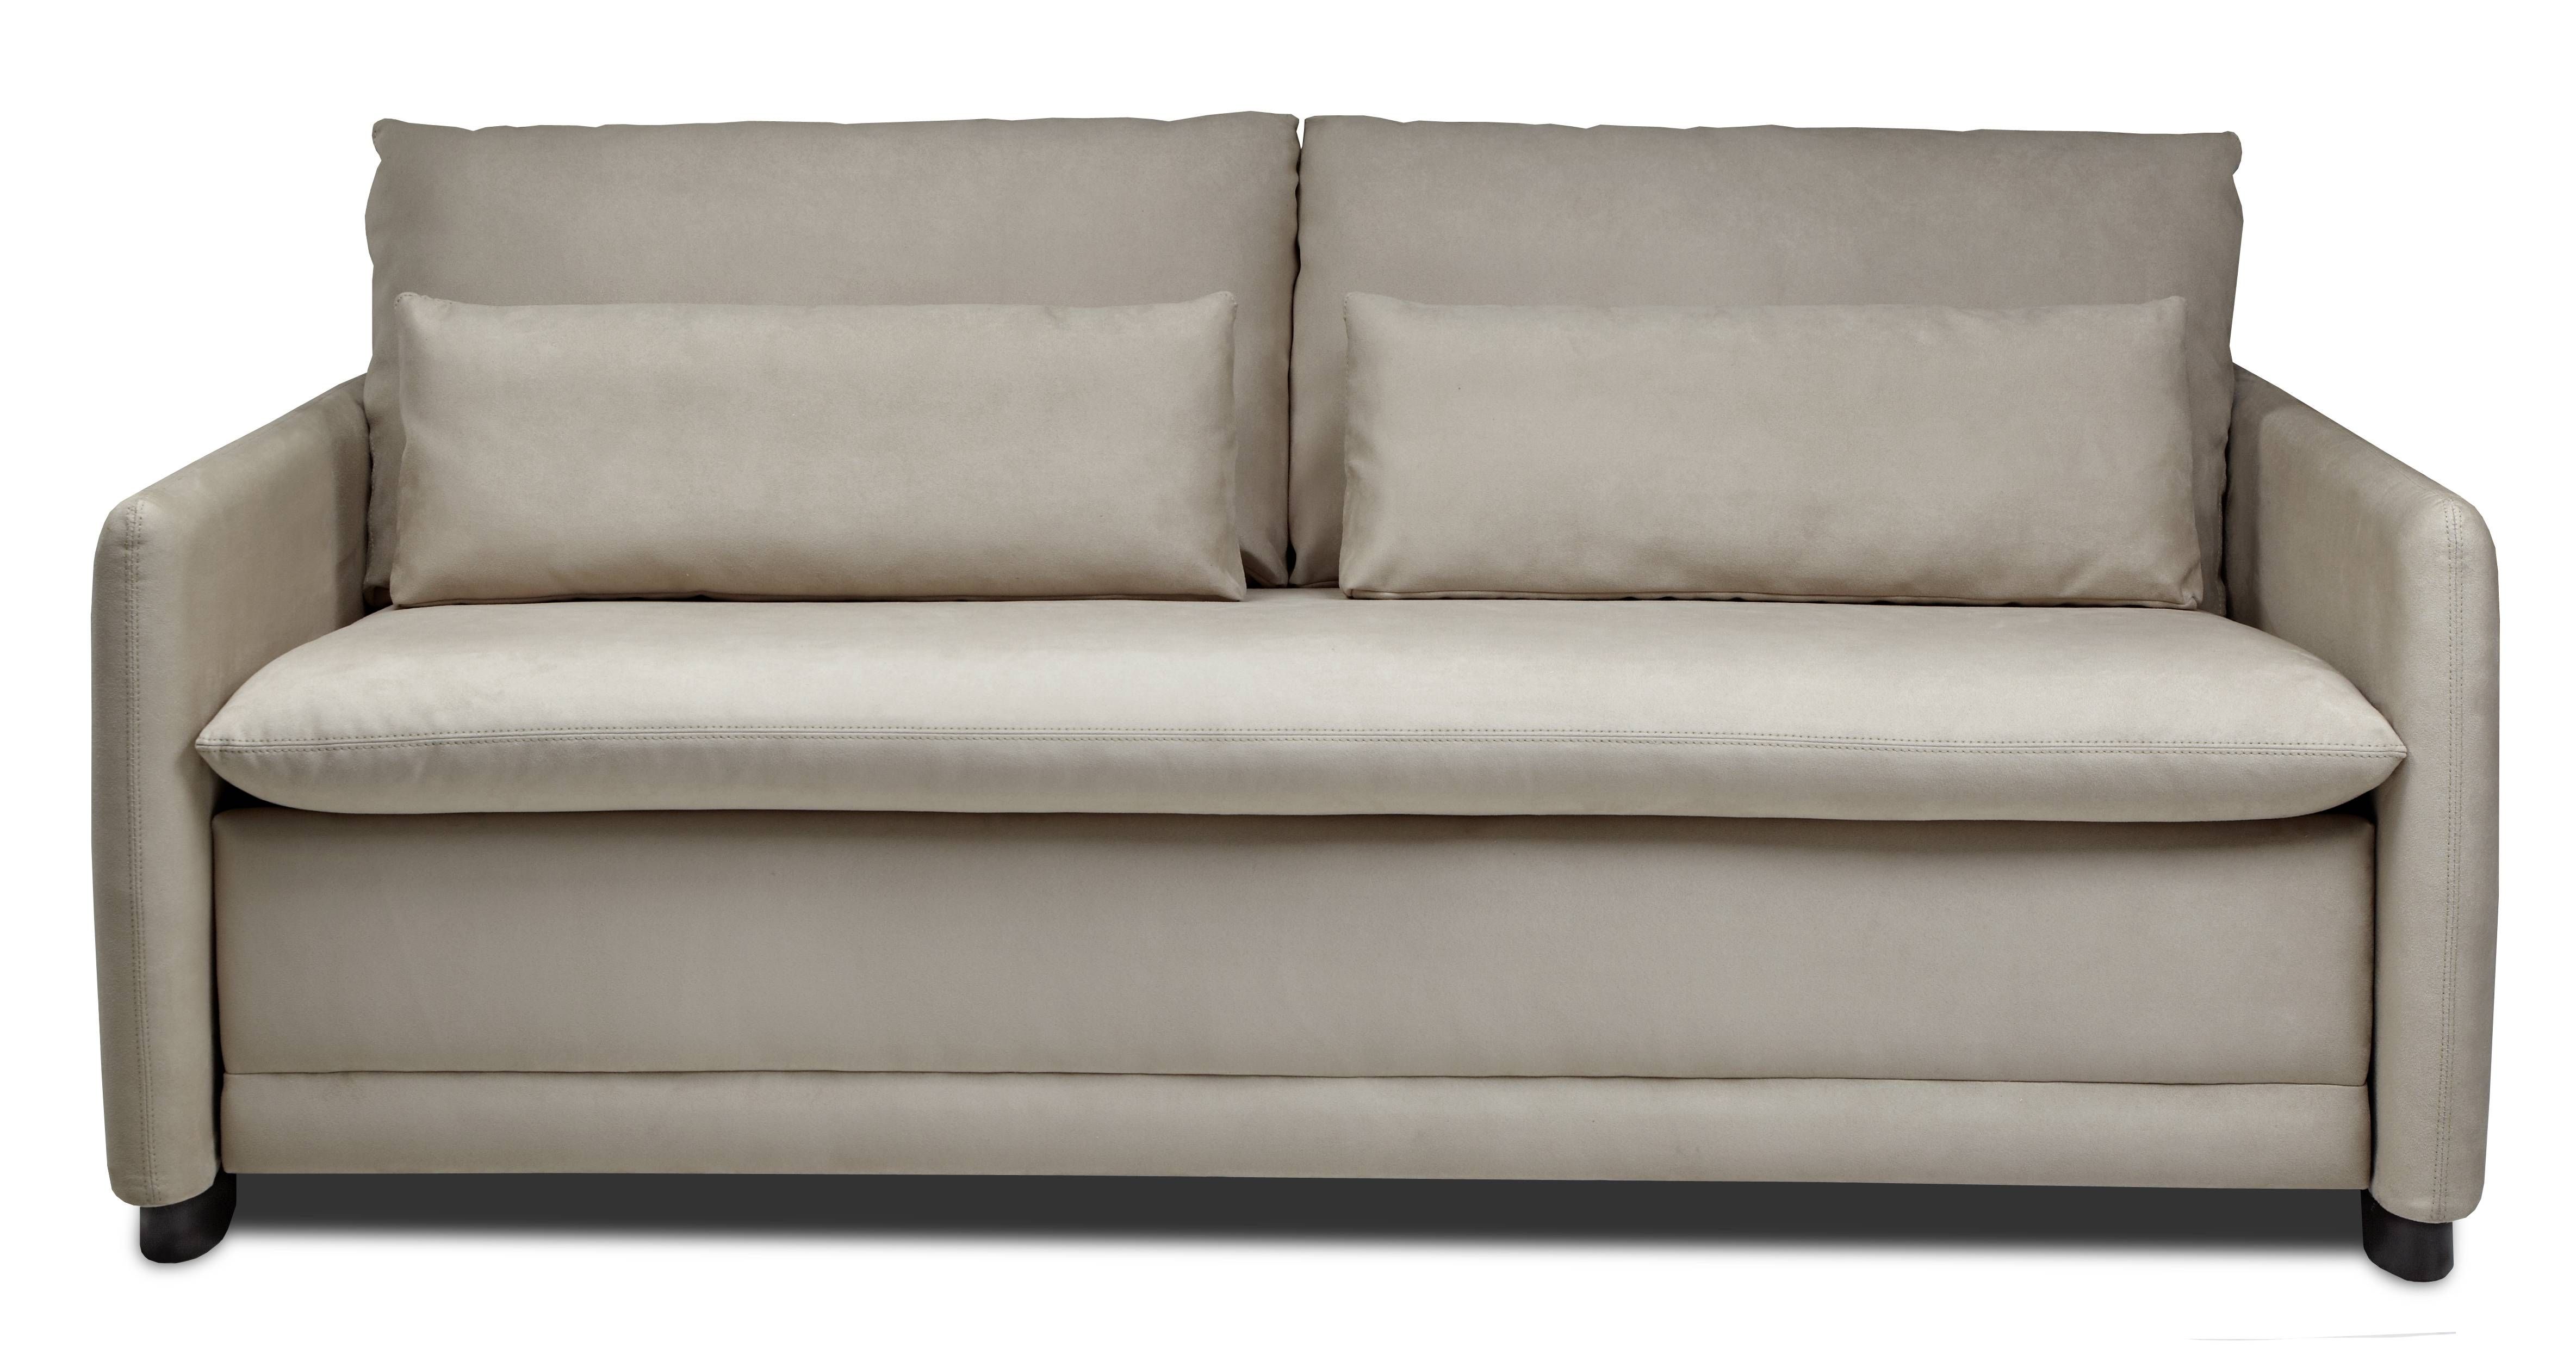 Silver Linen Fabric Upholstered Convertible Sofa Bed With Storage Regarding Comfortable Convertible Sofas (View 26 of 30)